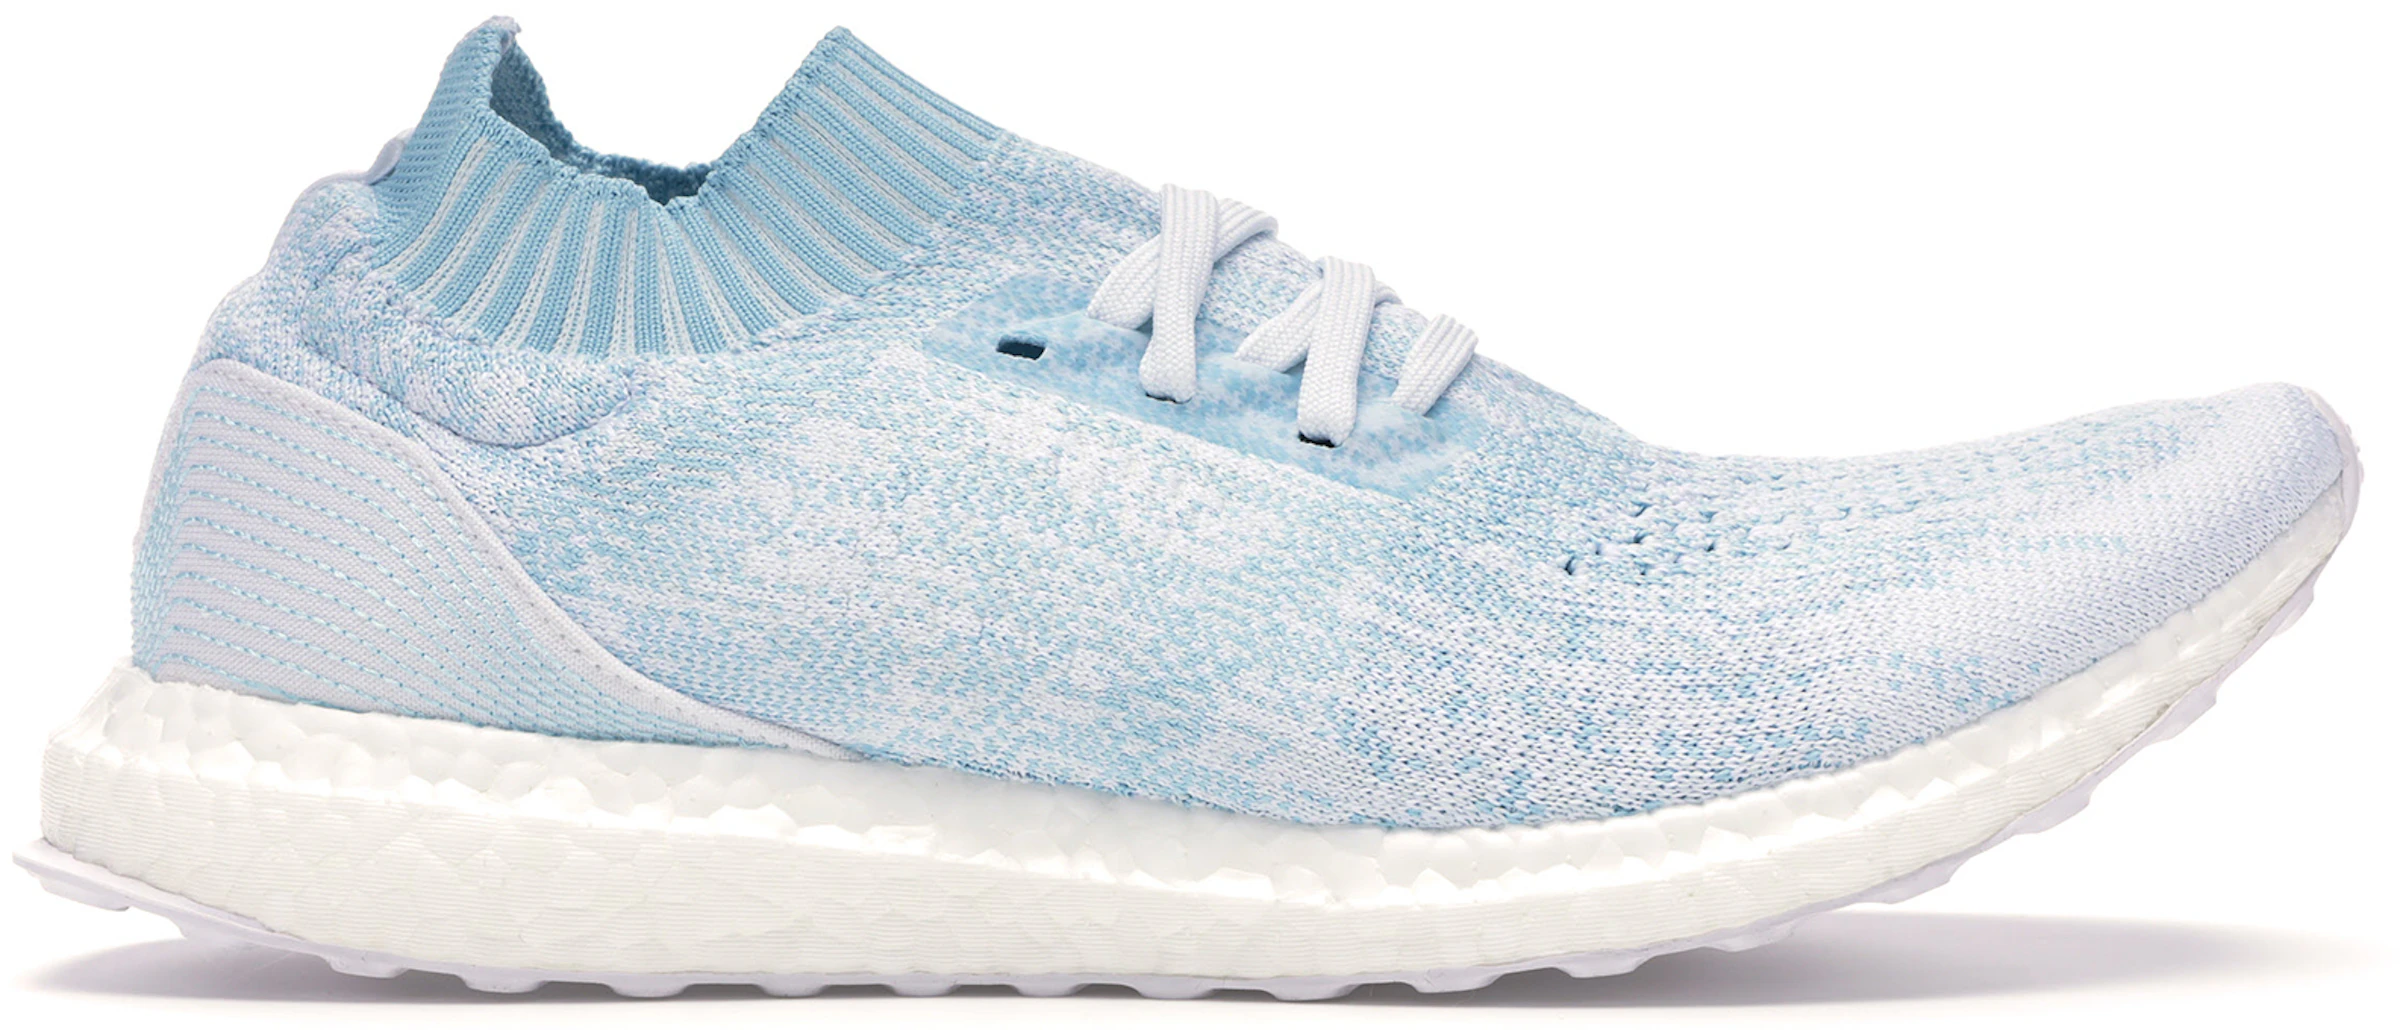 abeja Estereotipo pecho adidas Ultra Boost Uncaged Parley Coral Bleaching - CP9686 - ES